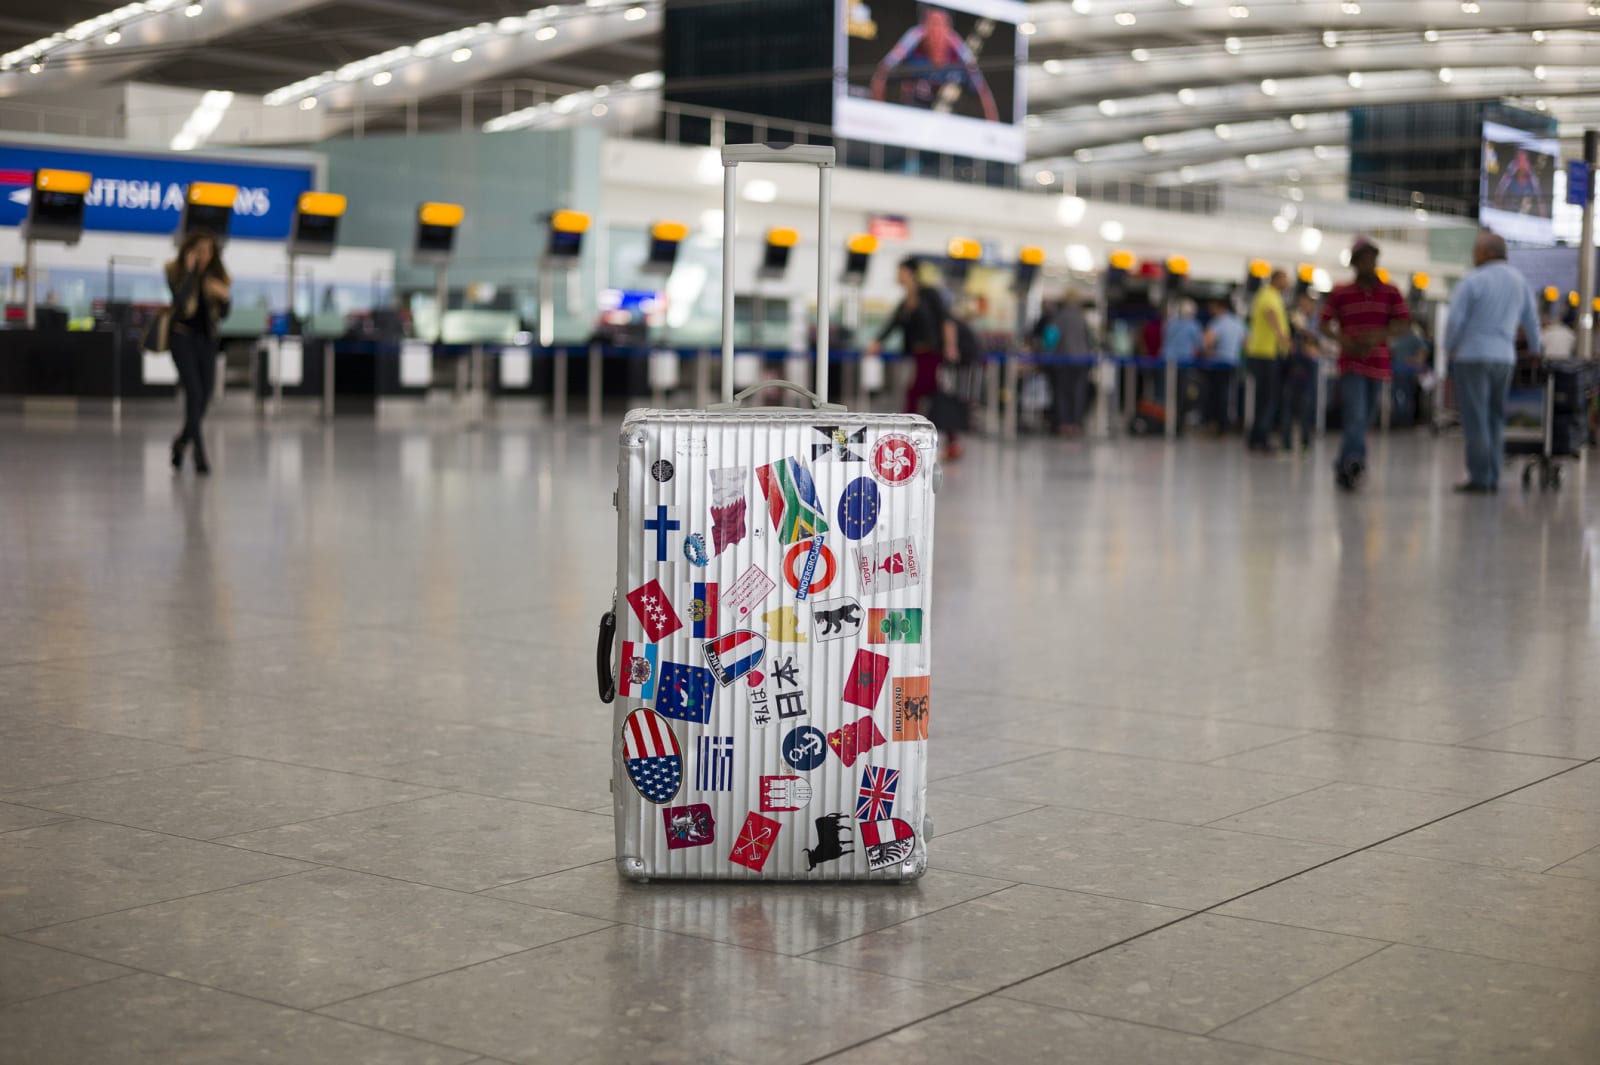 Luggage with stickers